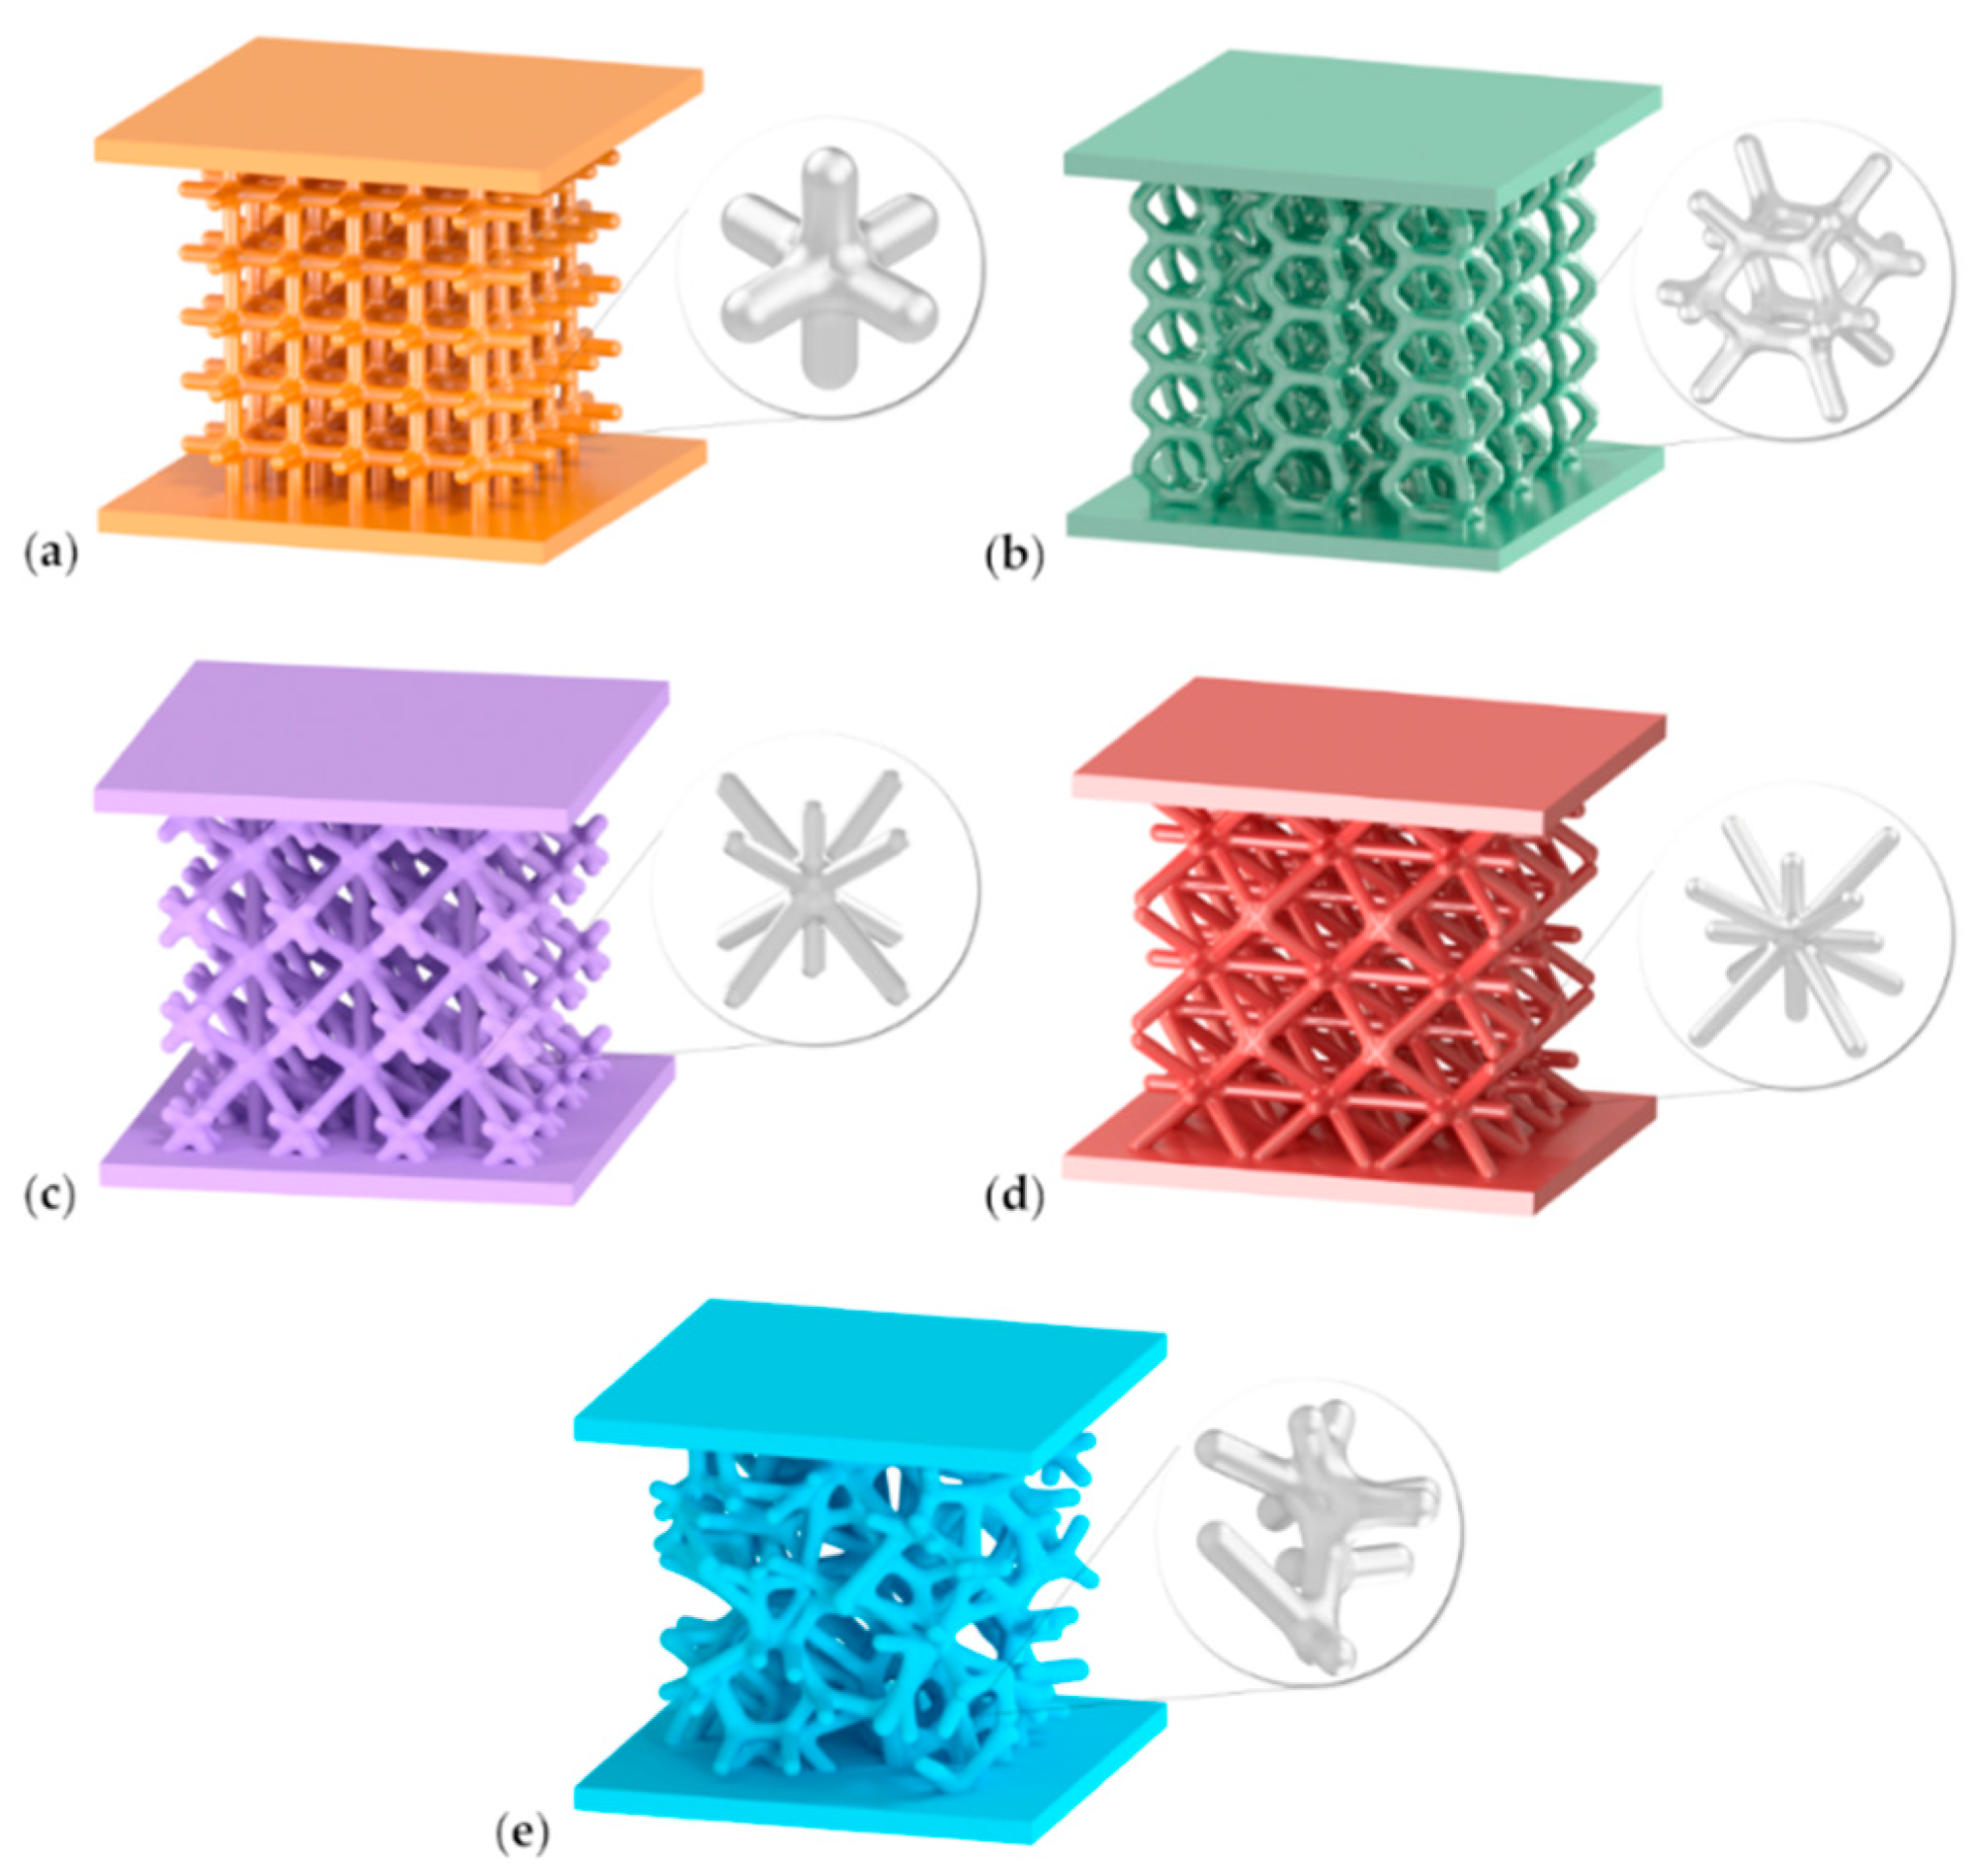 Lattice structures designed in Autodesk Netfabb 2021, with the following topology: (a) Grid; (b) Hexagon; (c) Star; (d) Tetra; (e) Trabecular, together with enlarged beam-like shapes.